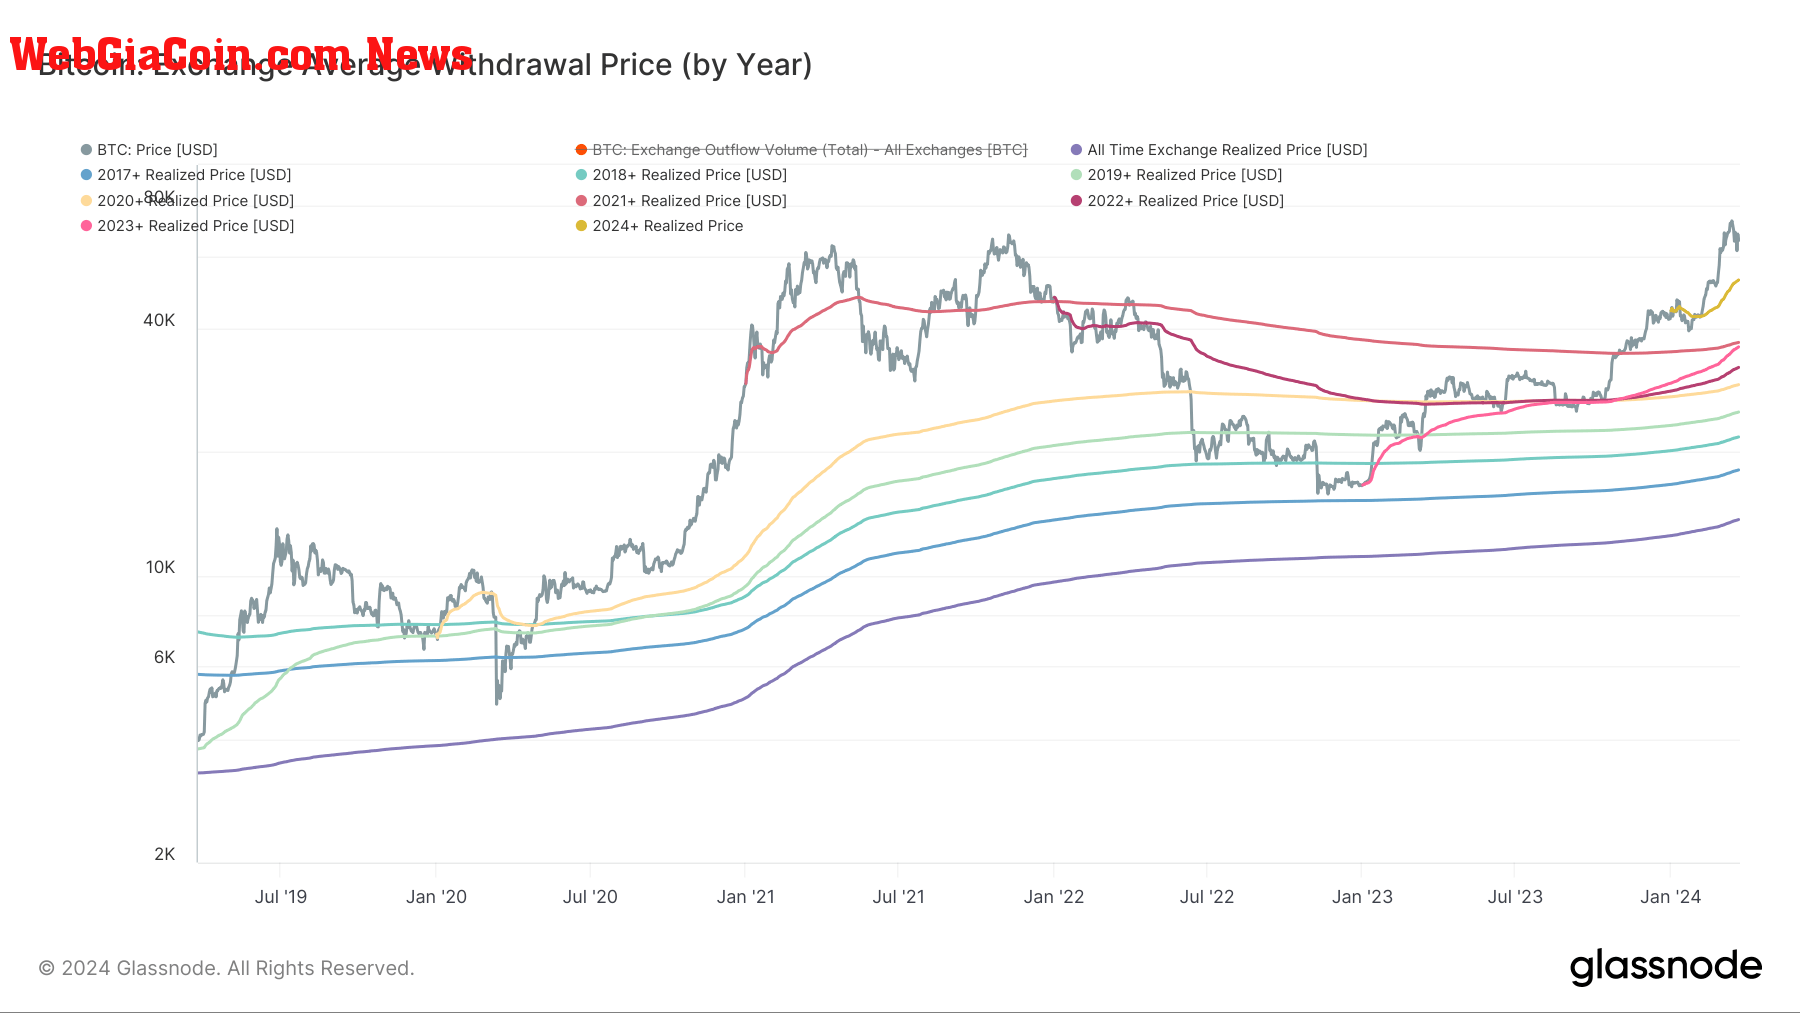 Exchange Average Withdrawal Price (by Year): (Source: Glassnode)